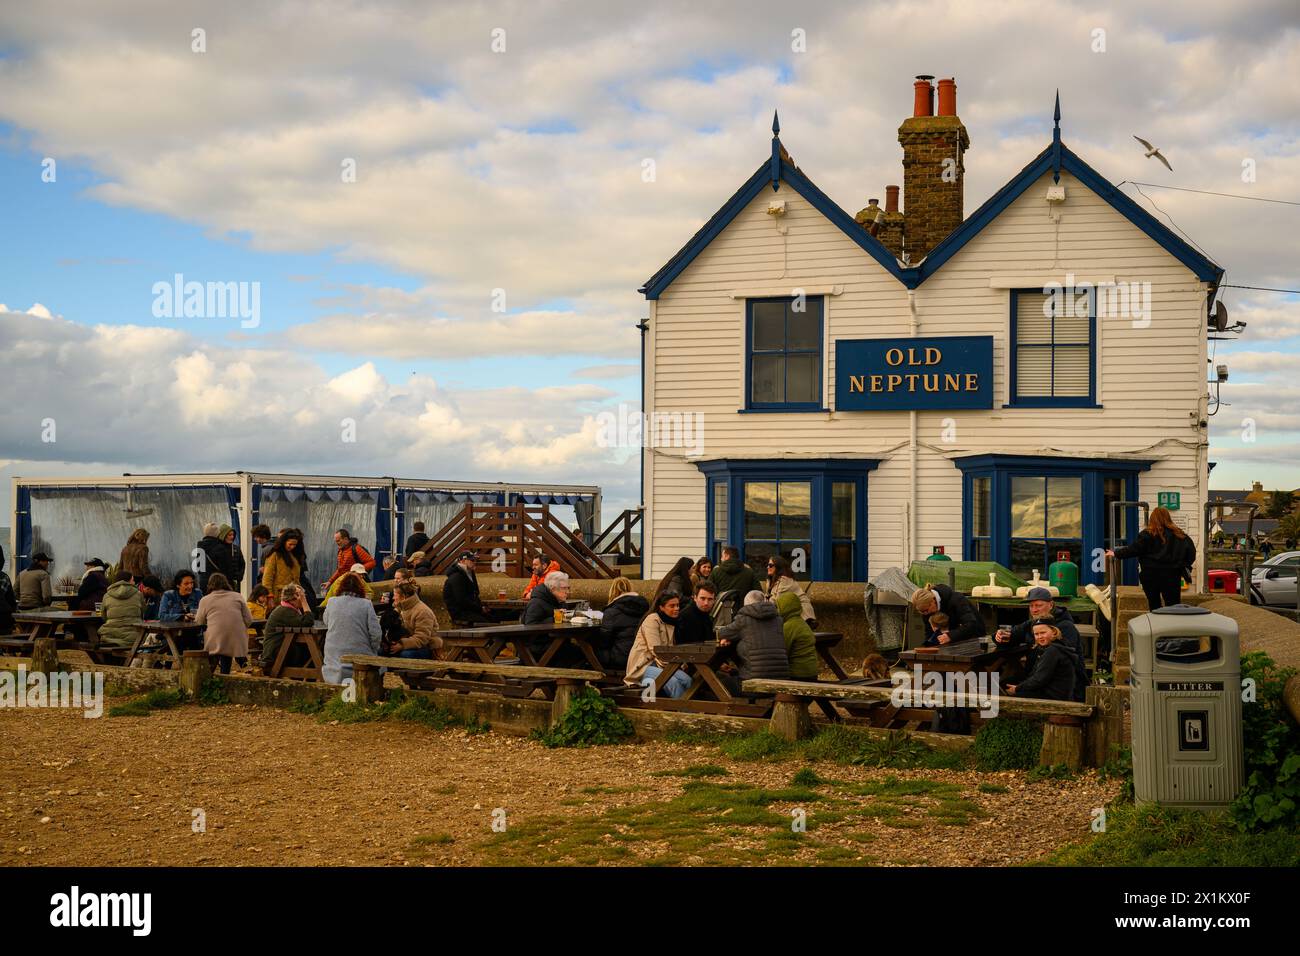 The Old Neptune Pub at Sundown, Whitstable, Kent, Angleterre Banque D'Images